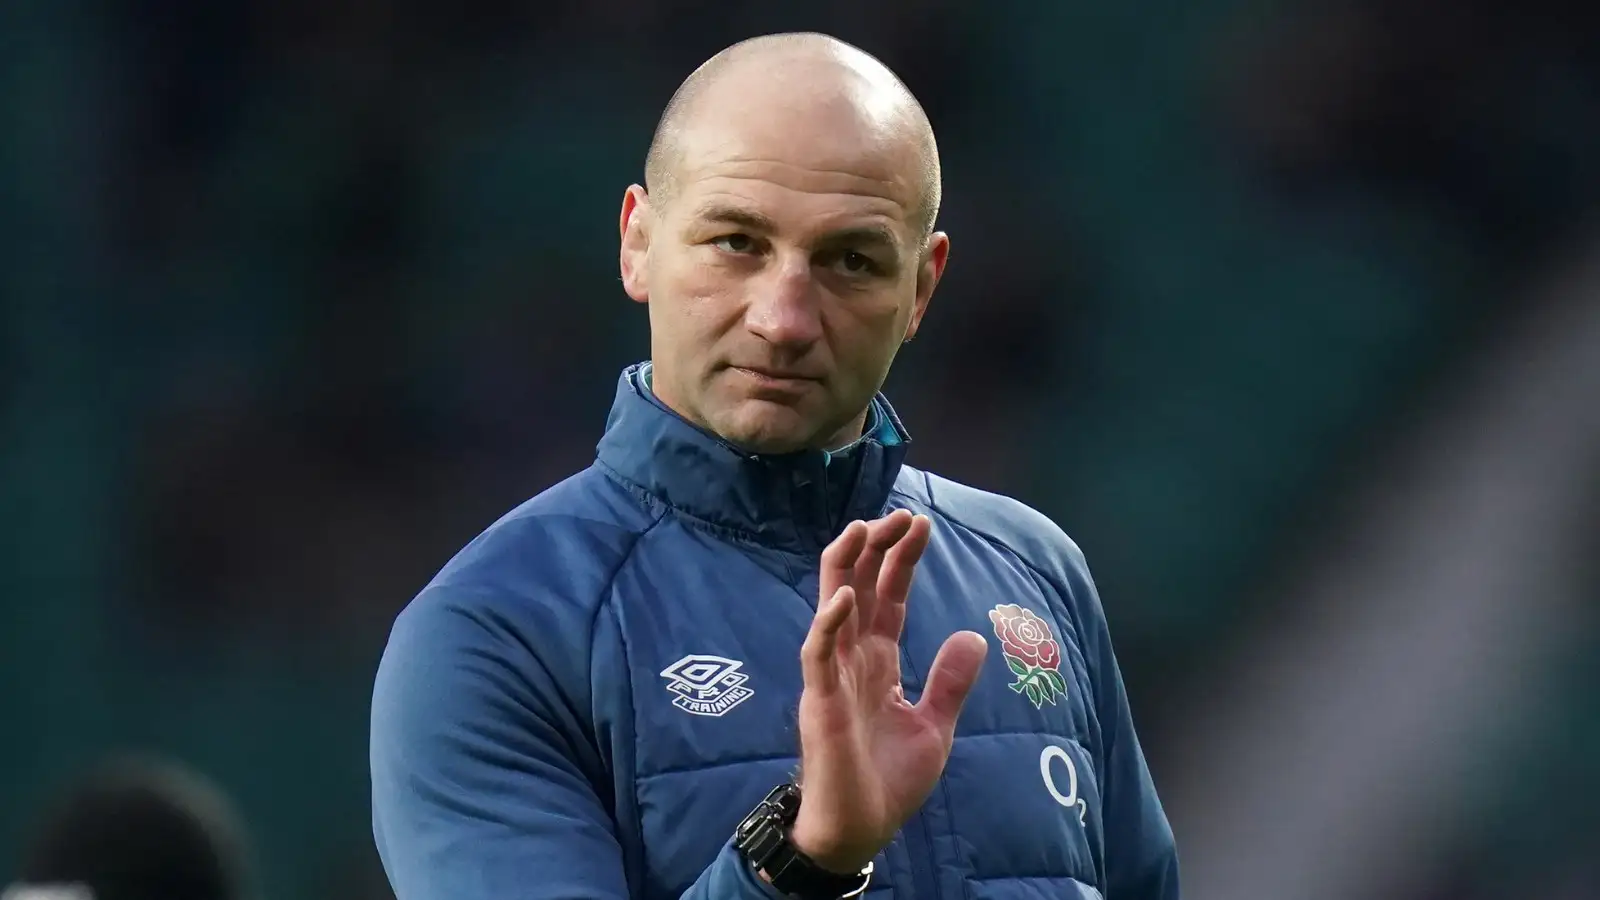 England head coach Steve Borthwick insists that his side still has plenty of work to fix their shortcomings after an opening Six Nations defeat to Scotland.